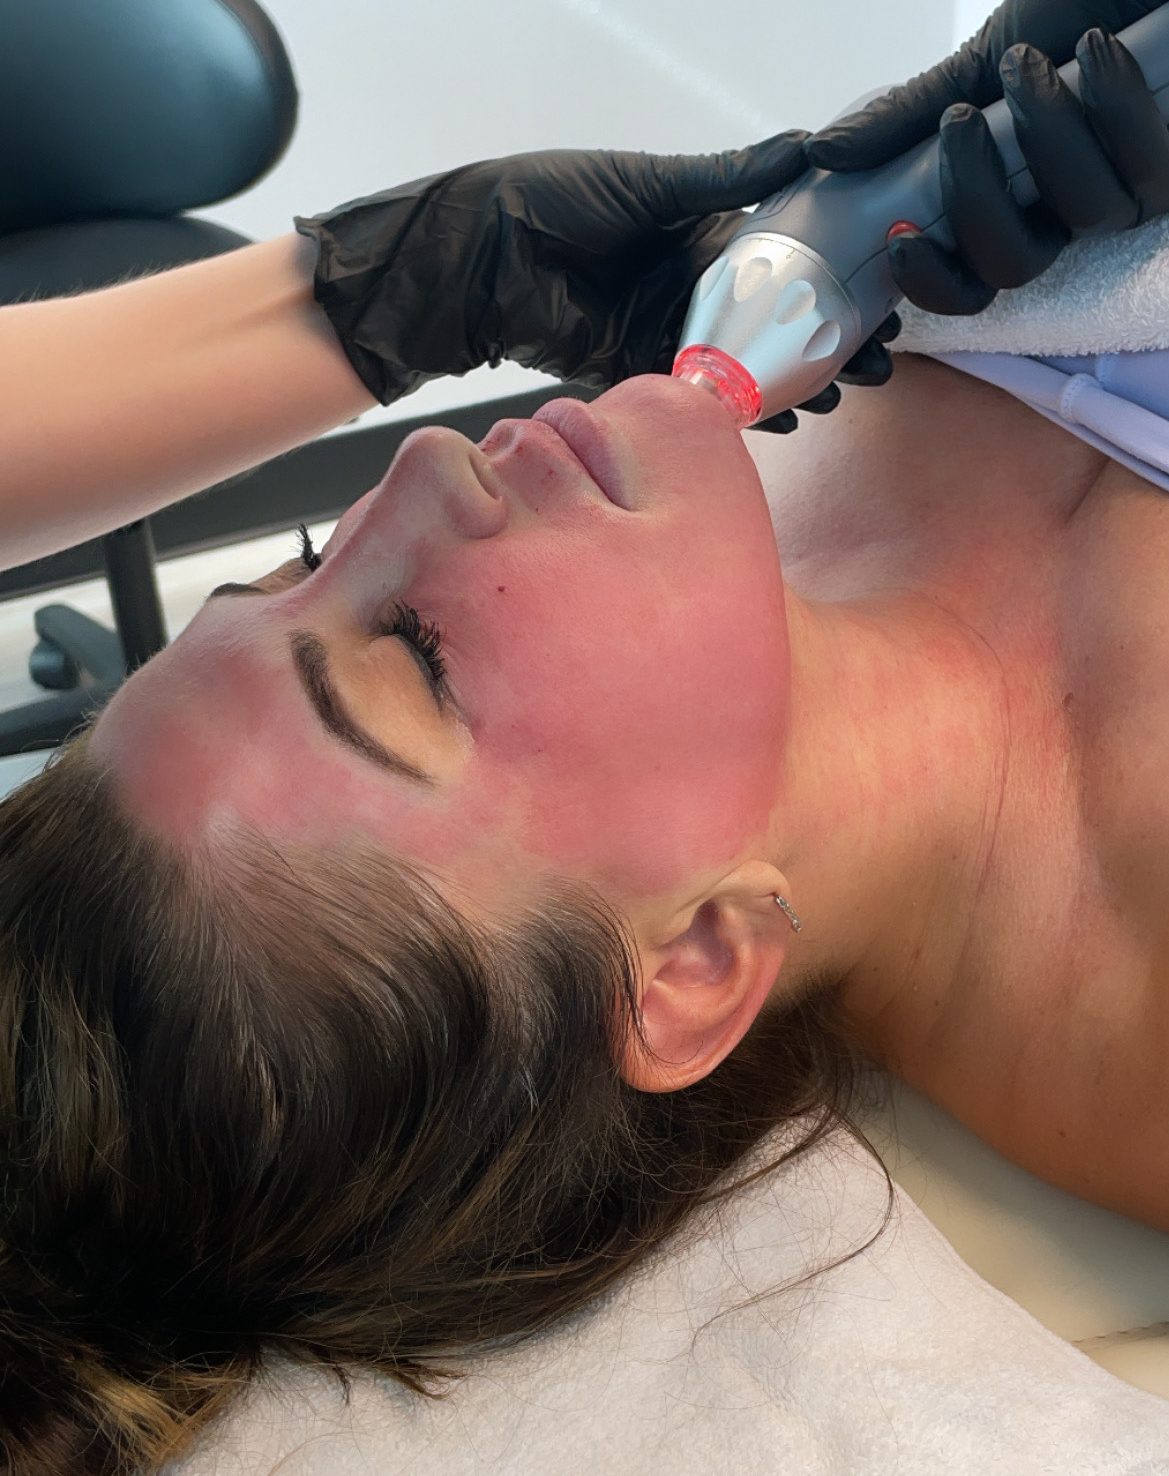 Jacqueline Laurita receiving the RF Microneedling treatment on her face, neck and chest to tighten the skin.